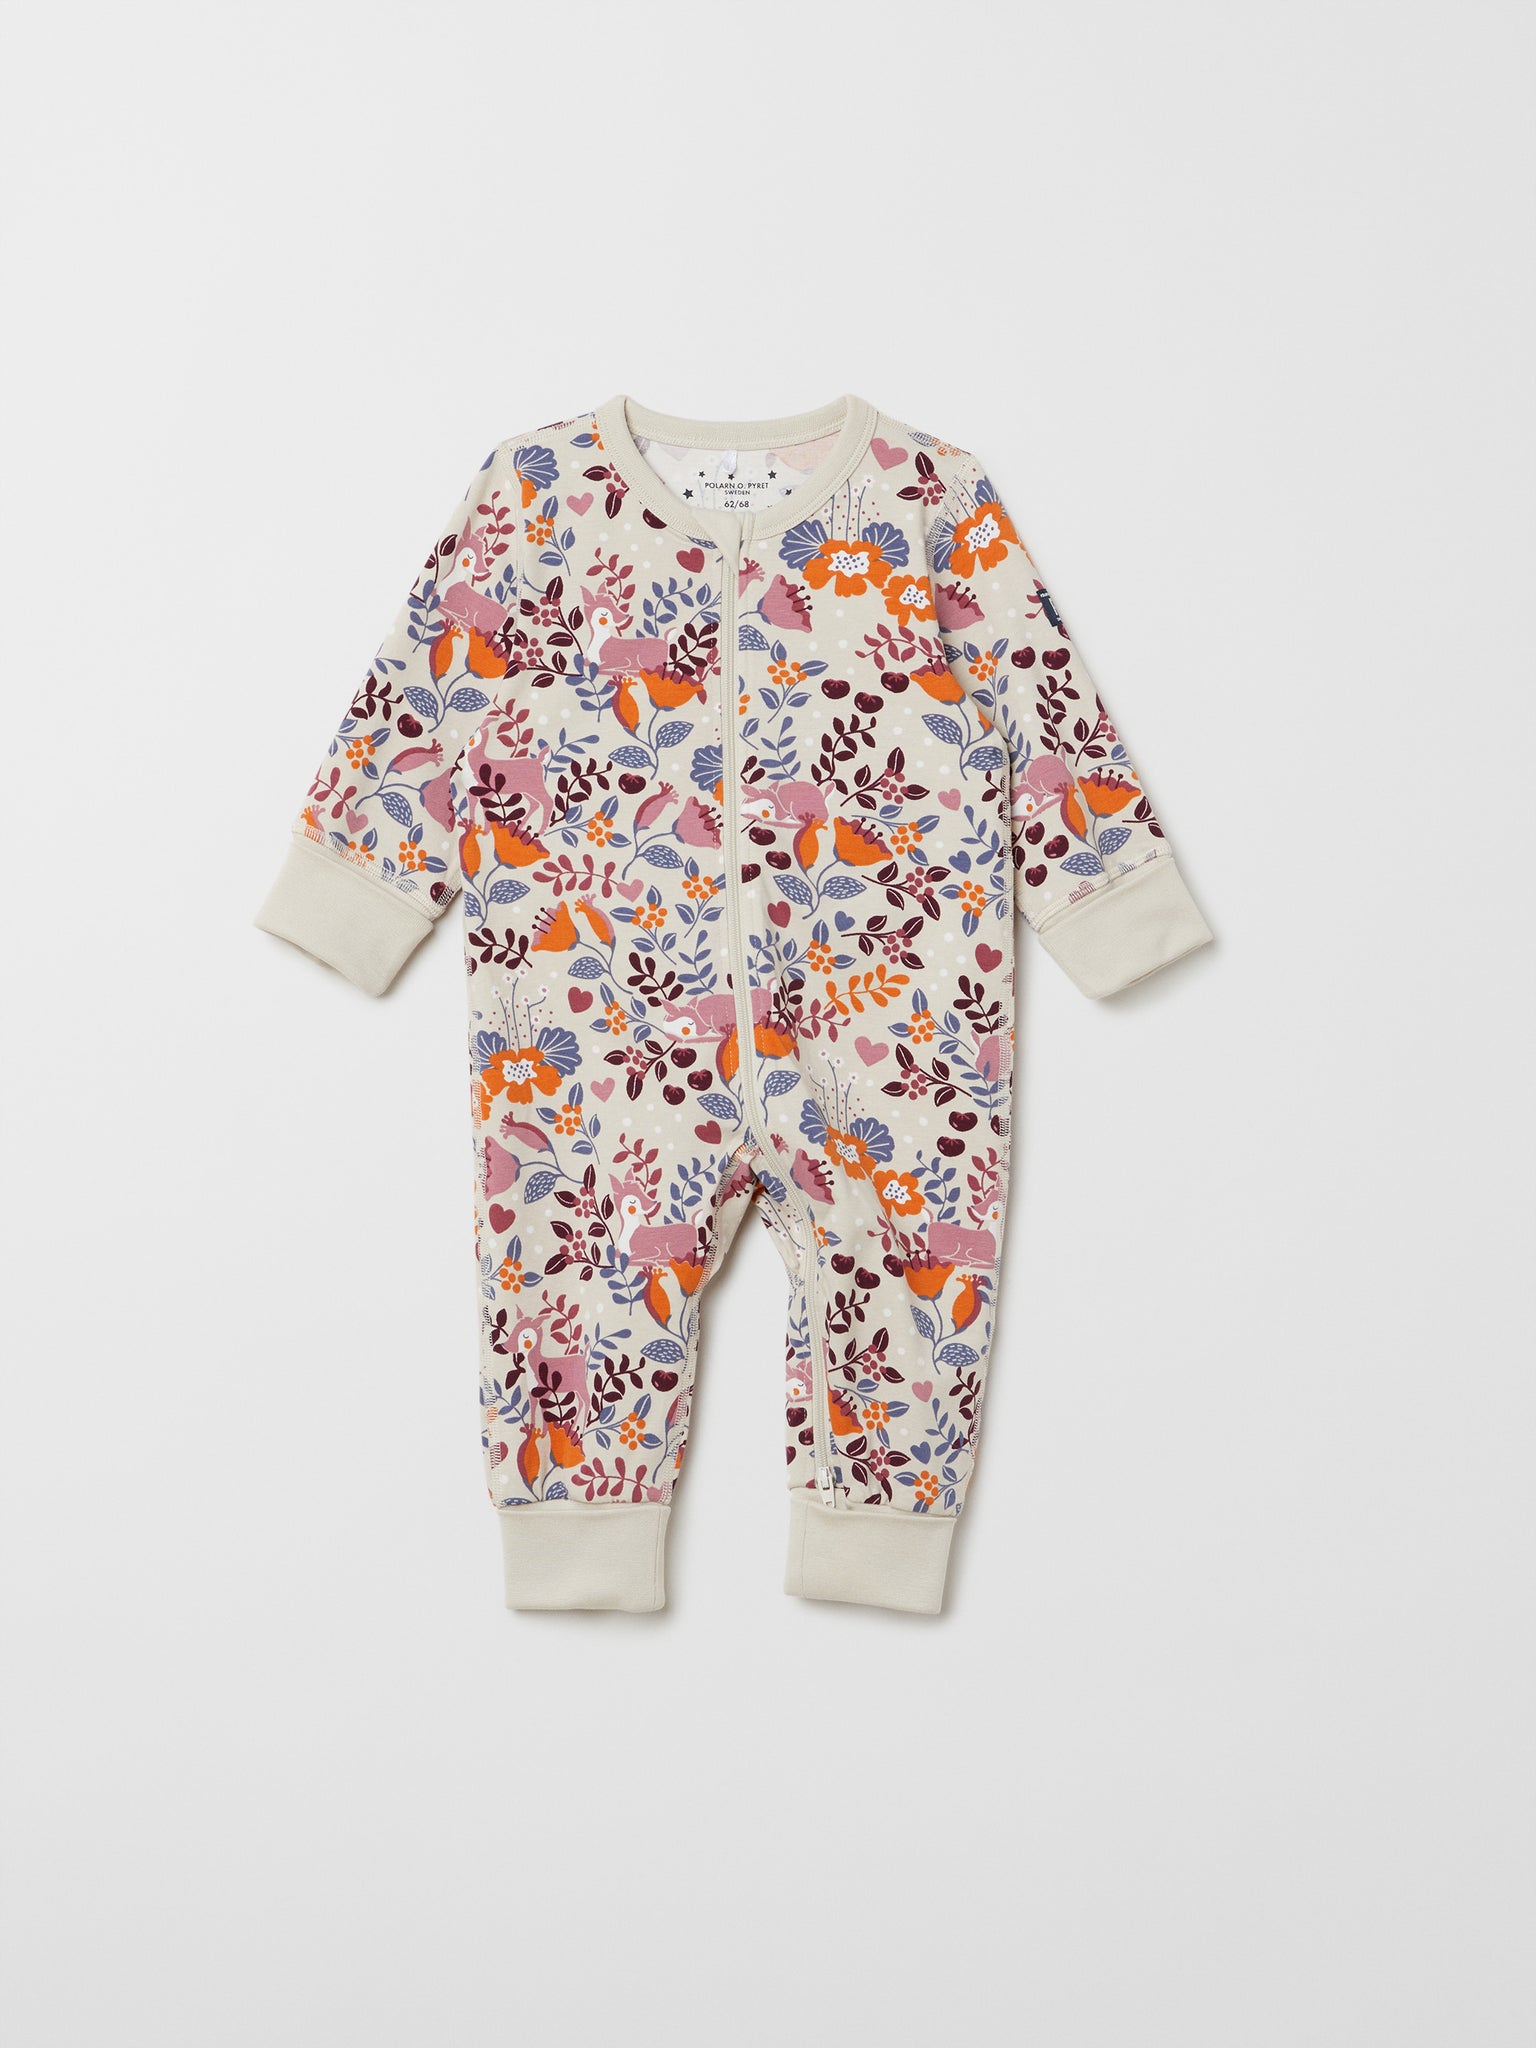 Floral Print Pink Baby Sleepsuit from the Polarn O. Pyret baby collection. Nordic baby clothes made from sustainable sources.